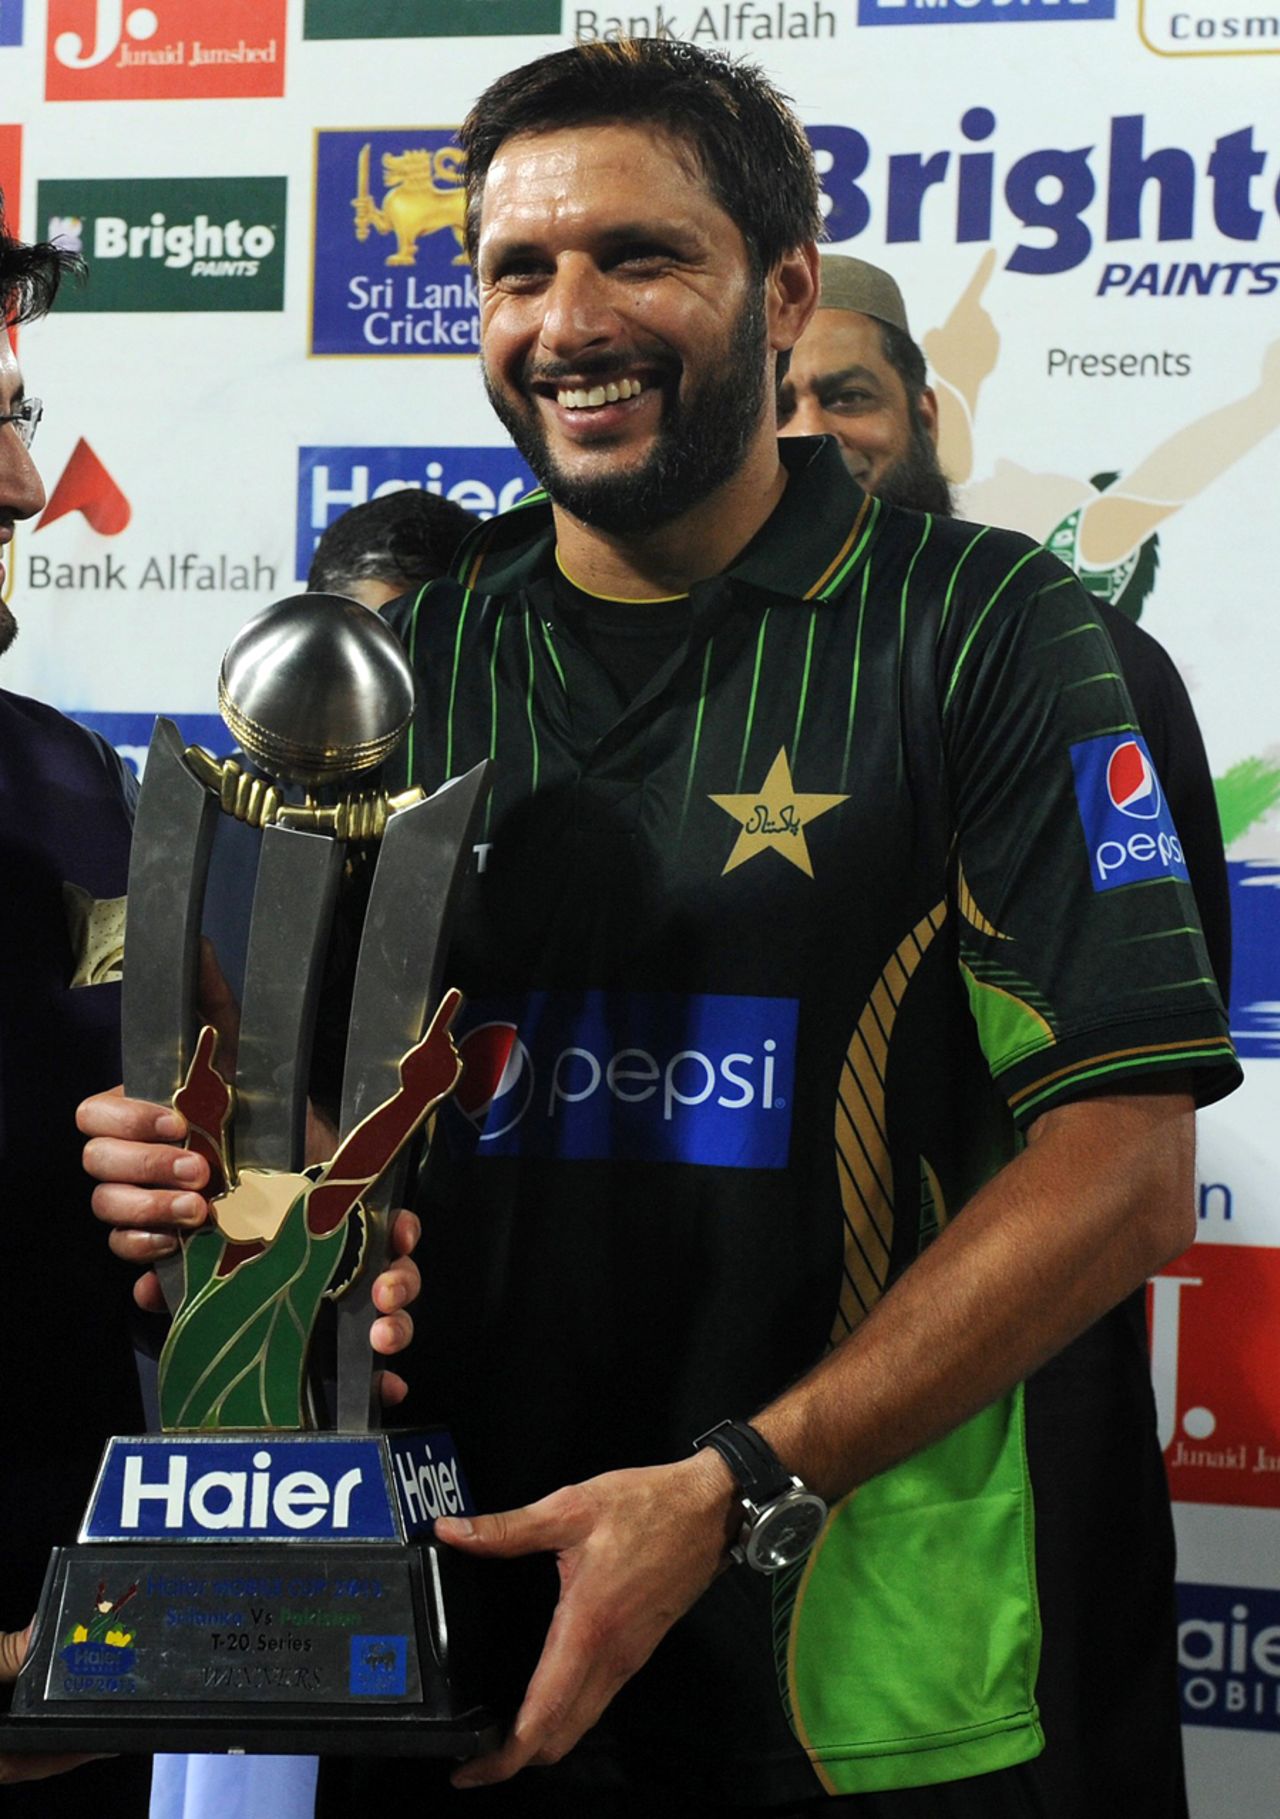 Shahid Afridi with the T20 trophy, which depicts a player doing his star-man celebration, Sri Lanka v Pakistan, 2nd T20, Colombo, August 1, 2015